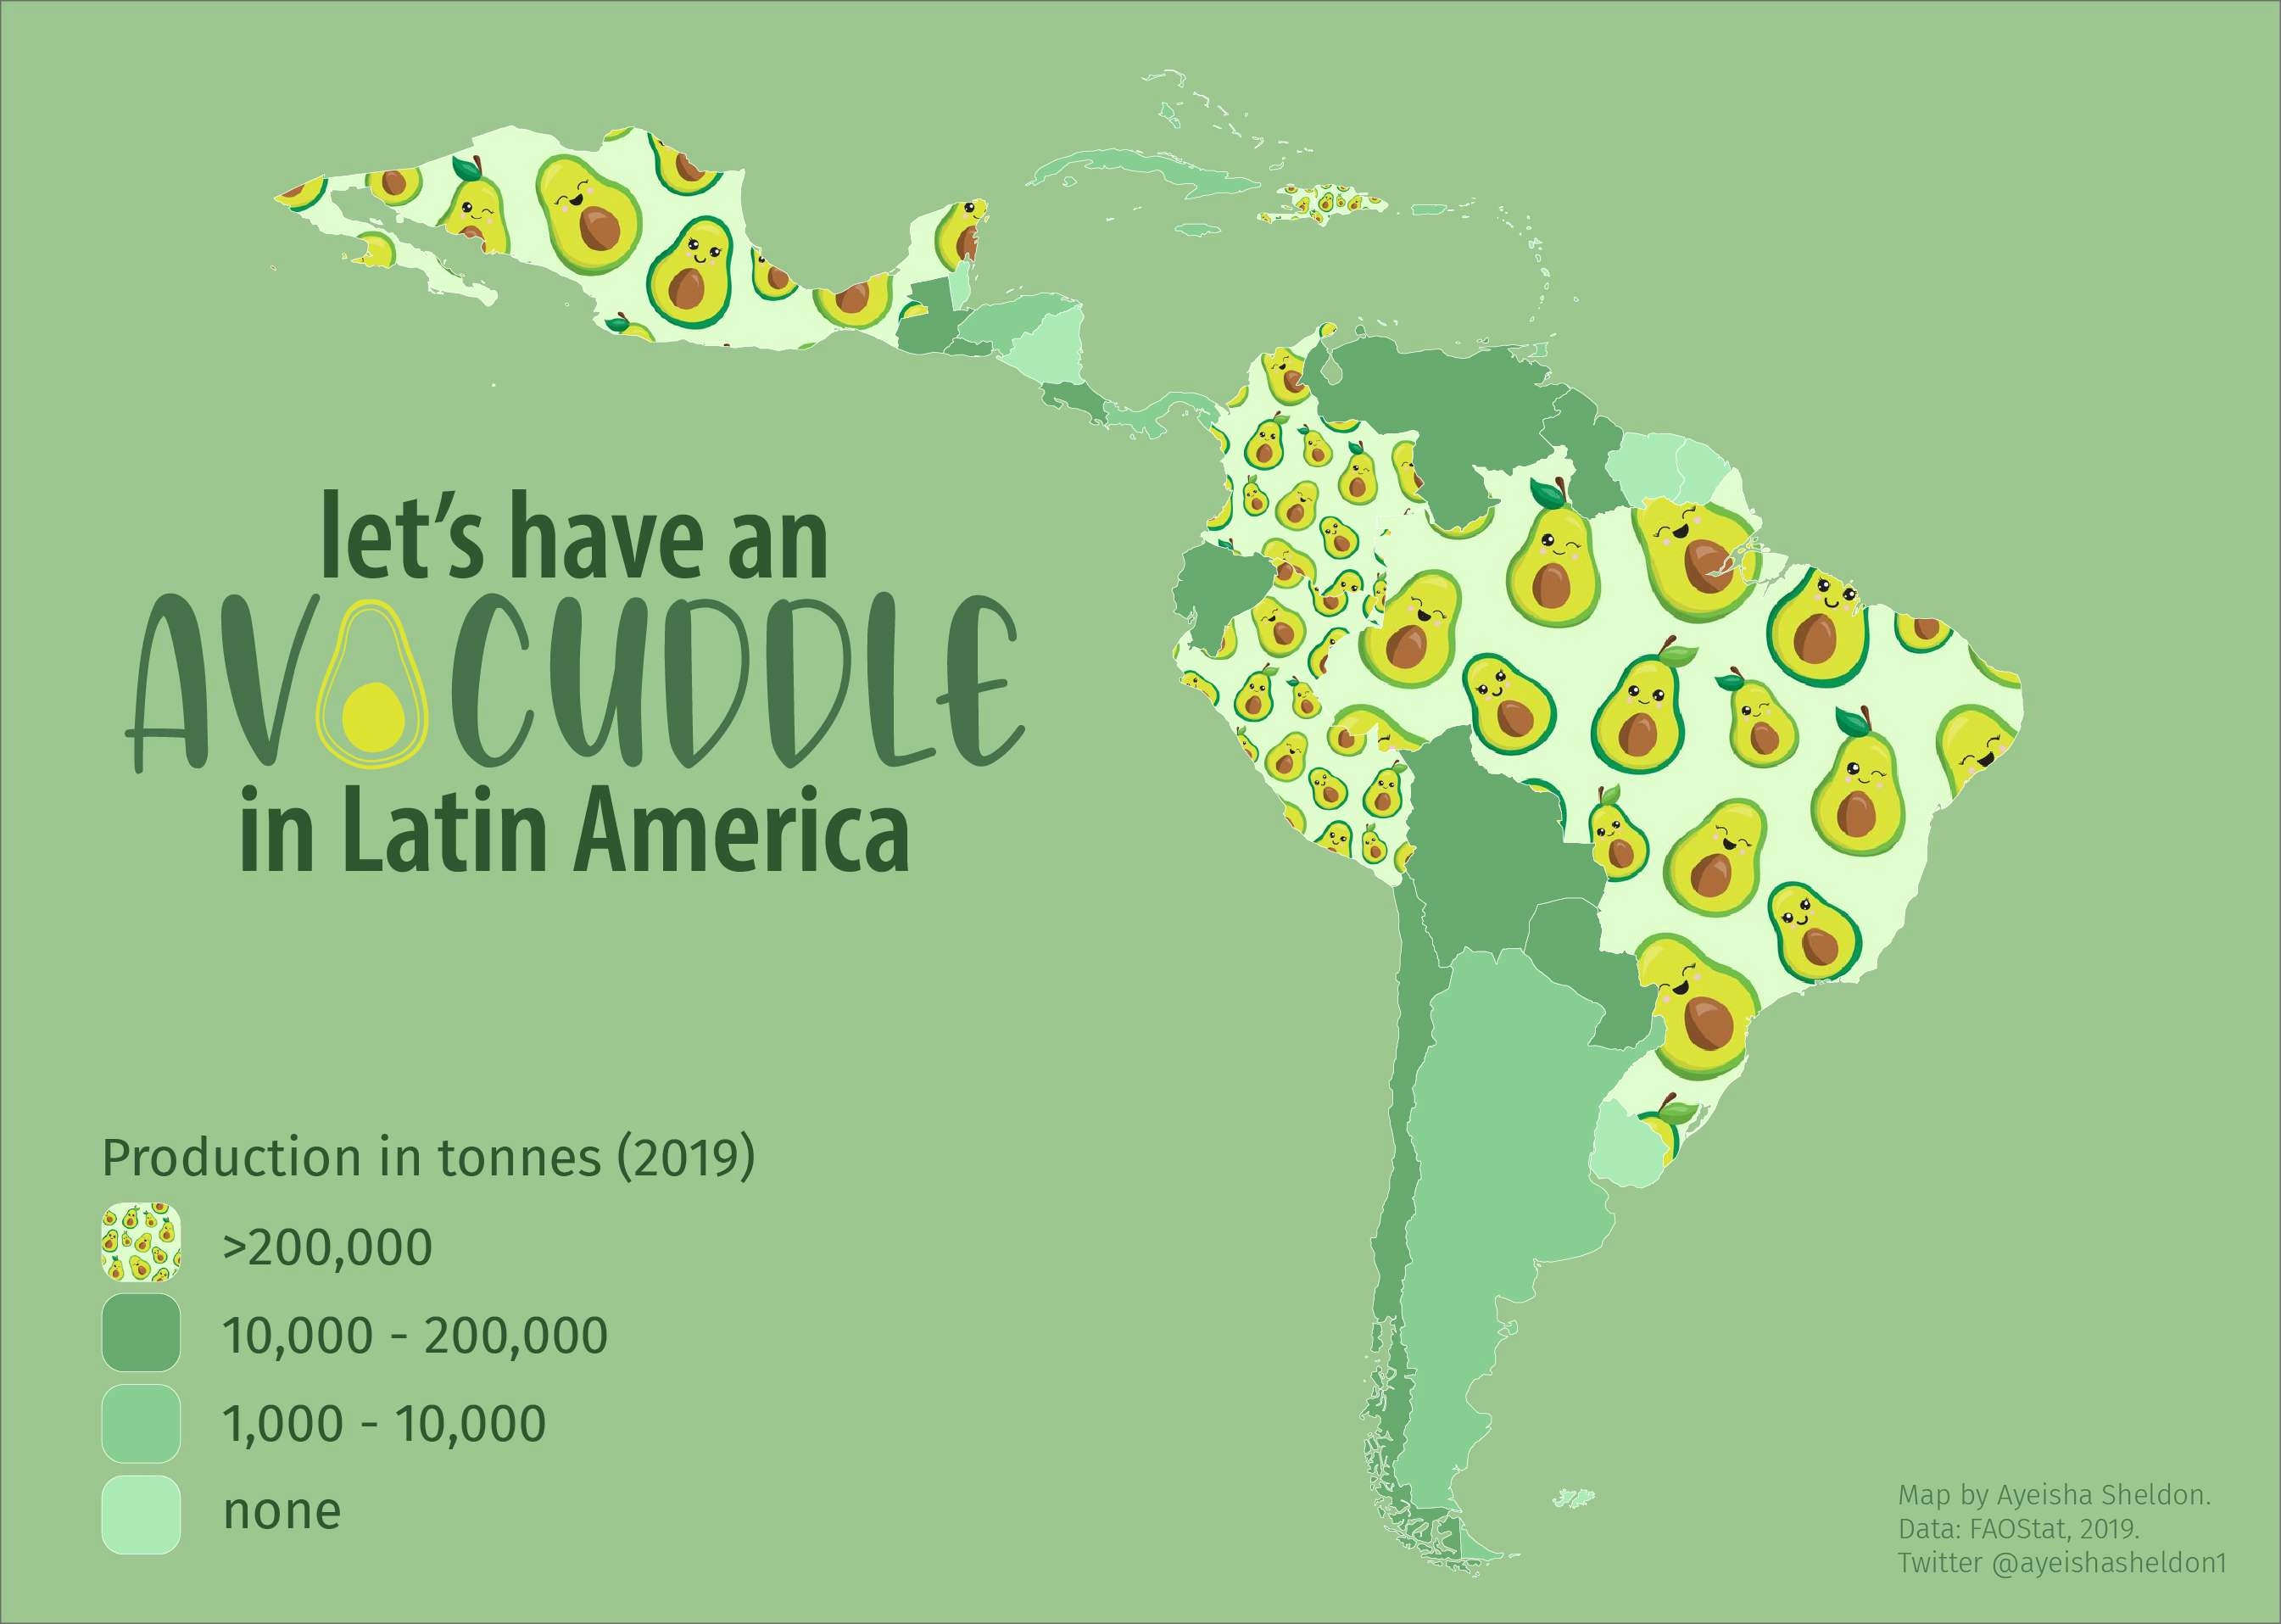 Let's have an AVOcuddle in Latin America